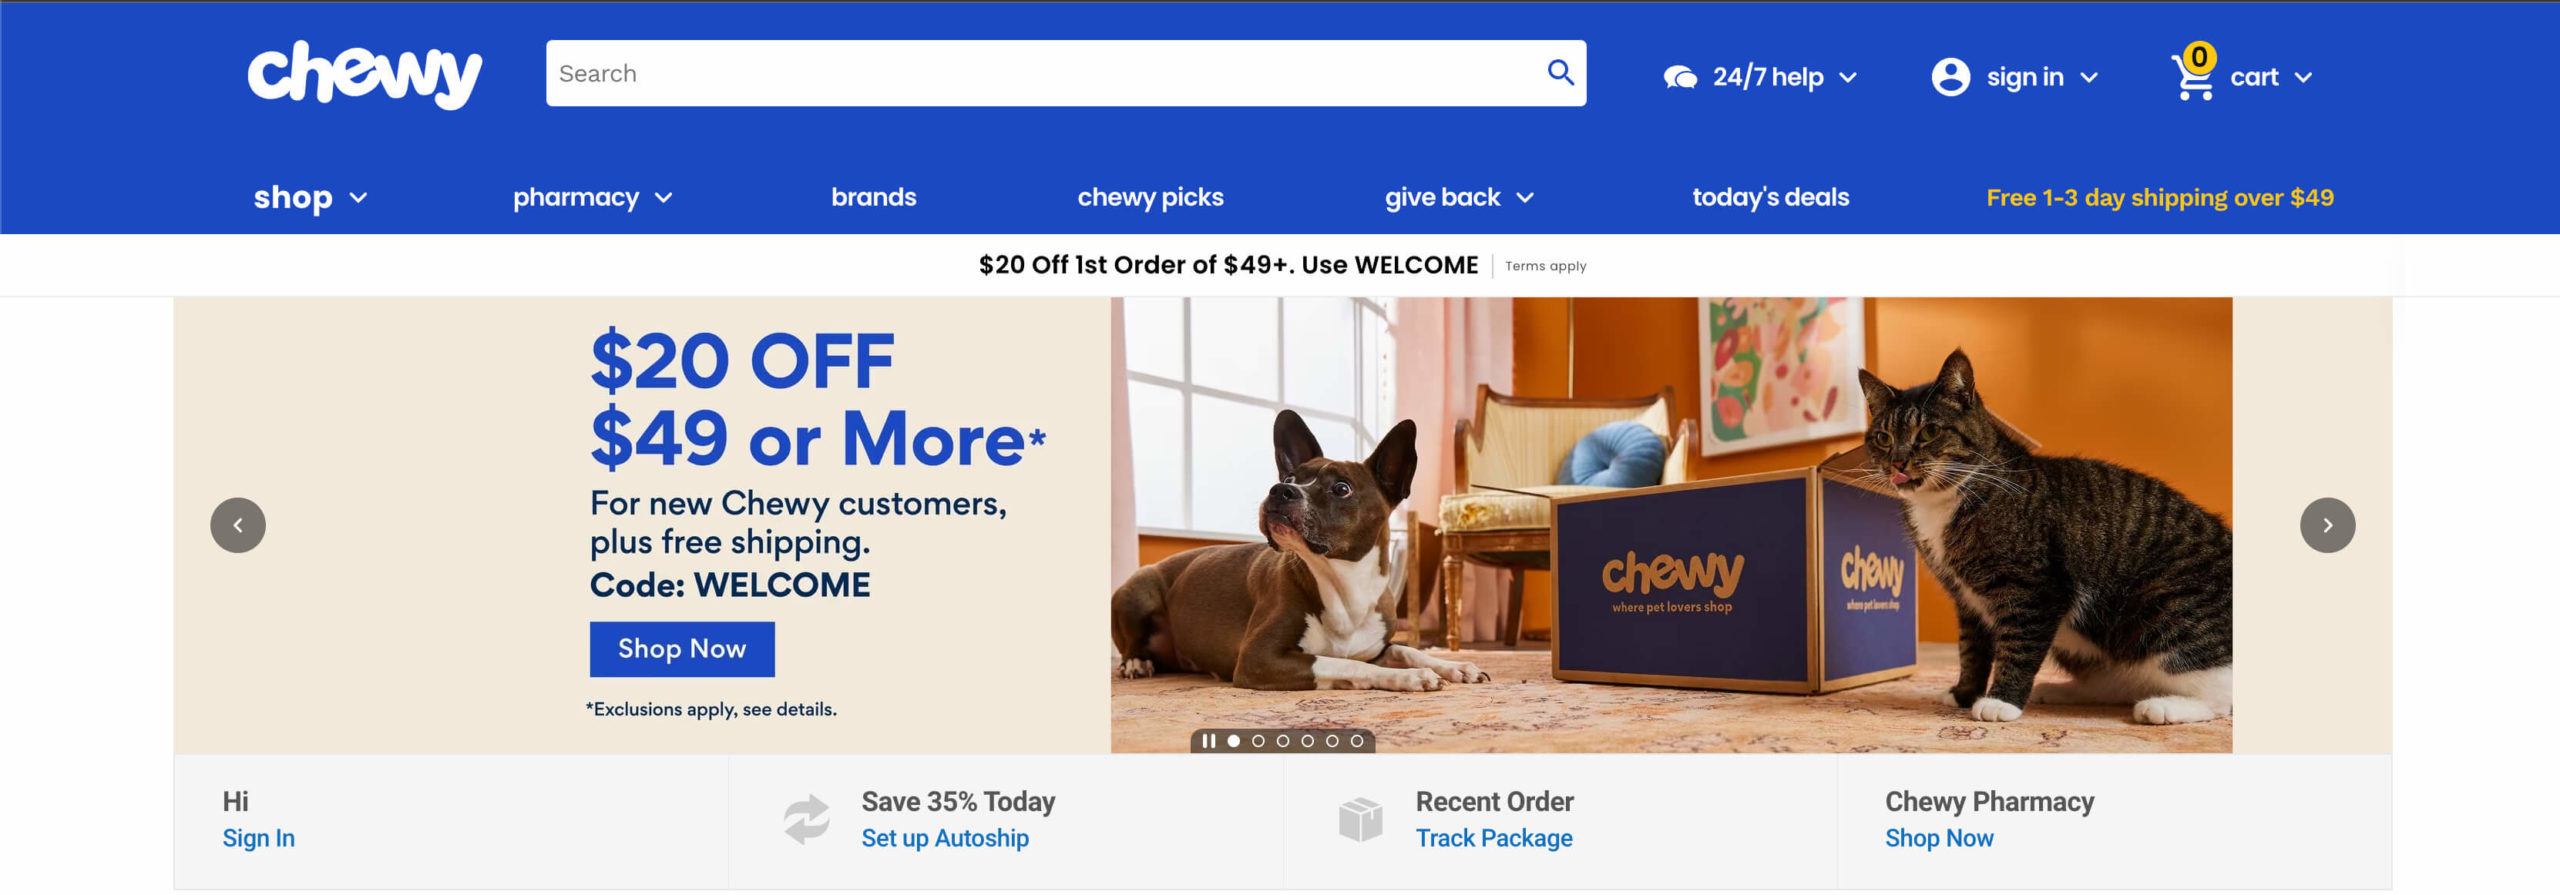 Chewy.com homepage with a slider